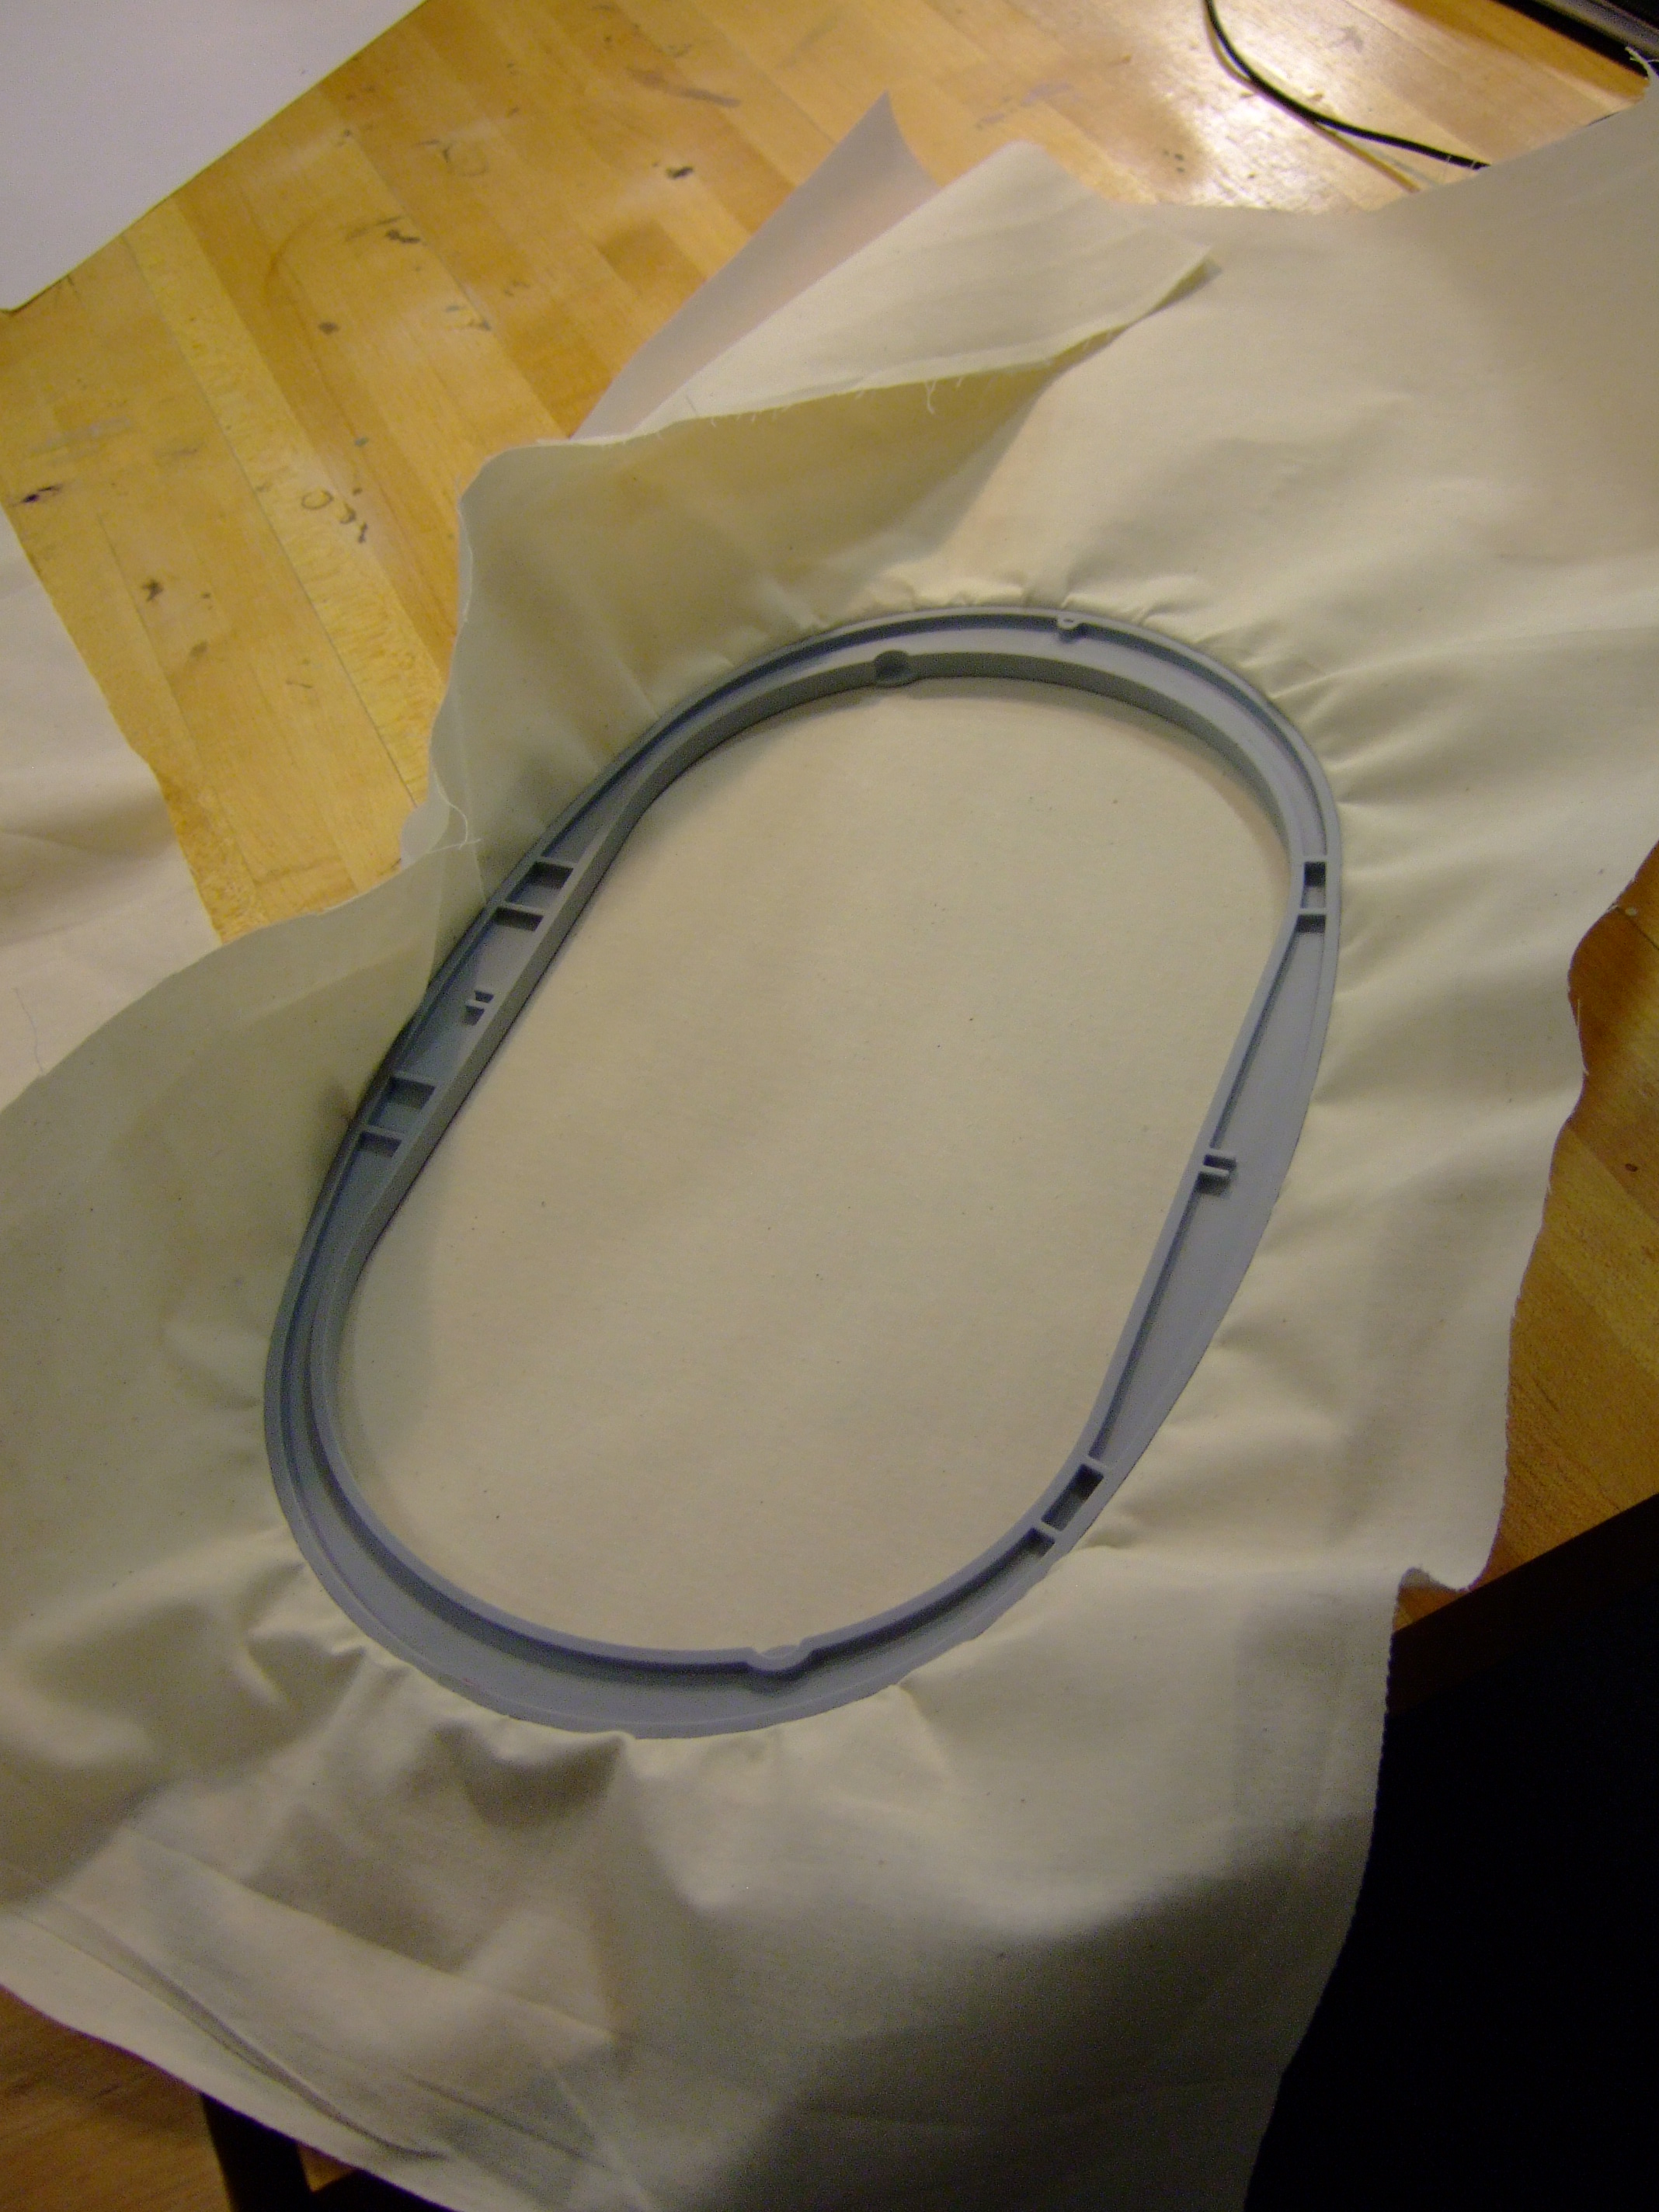 Putting the fabric into the embroidery hoop